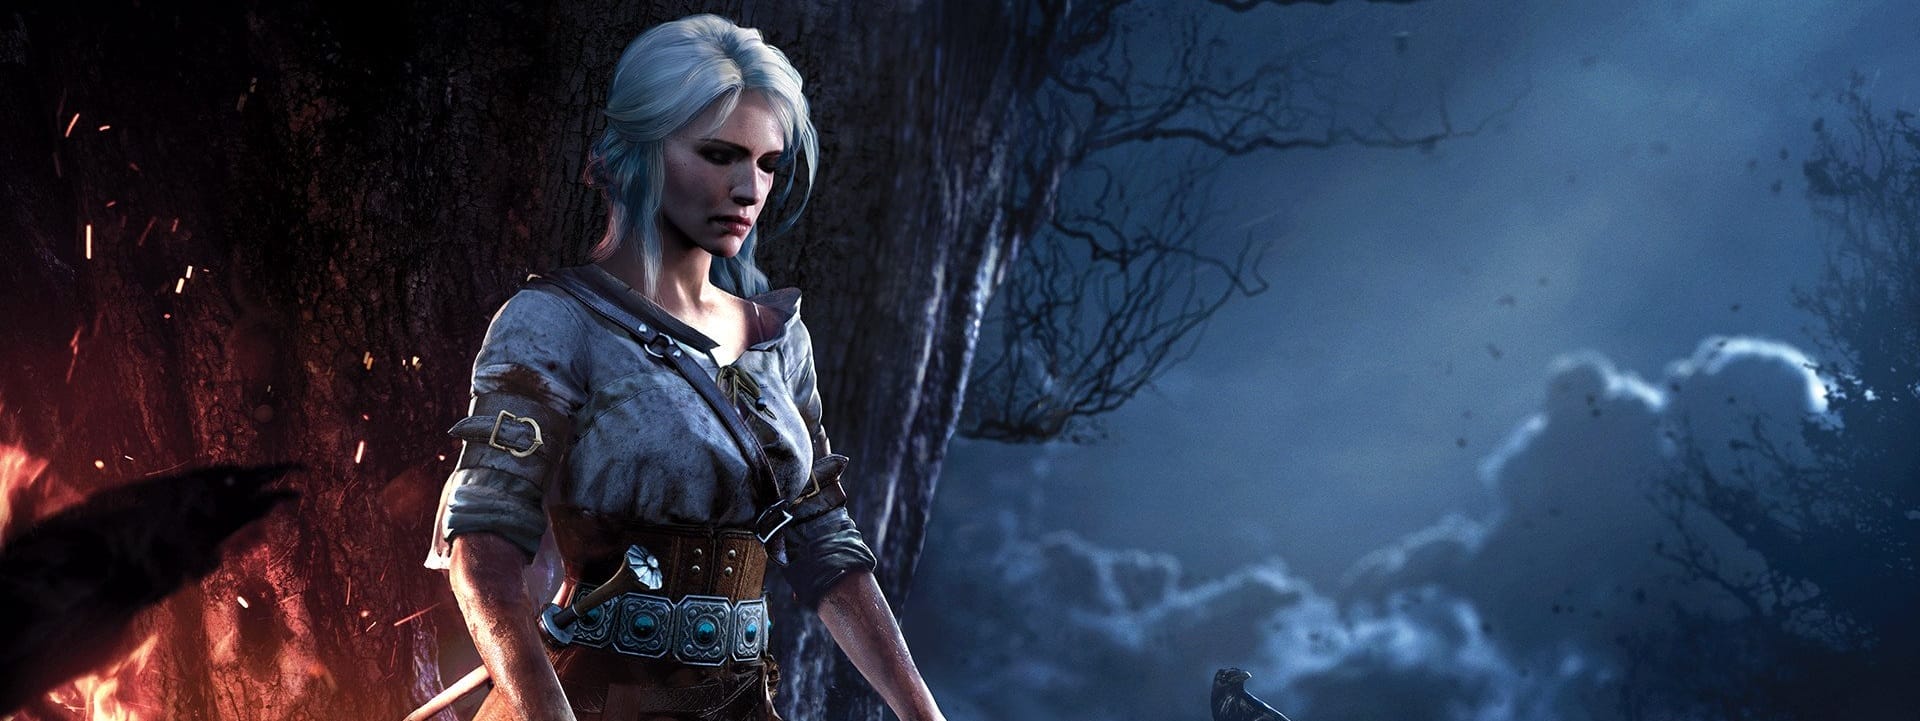 The Witcher 4 Might Focus on Ciri's Story